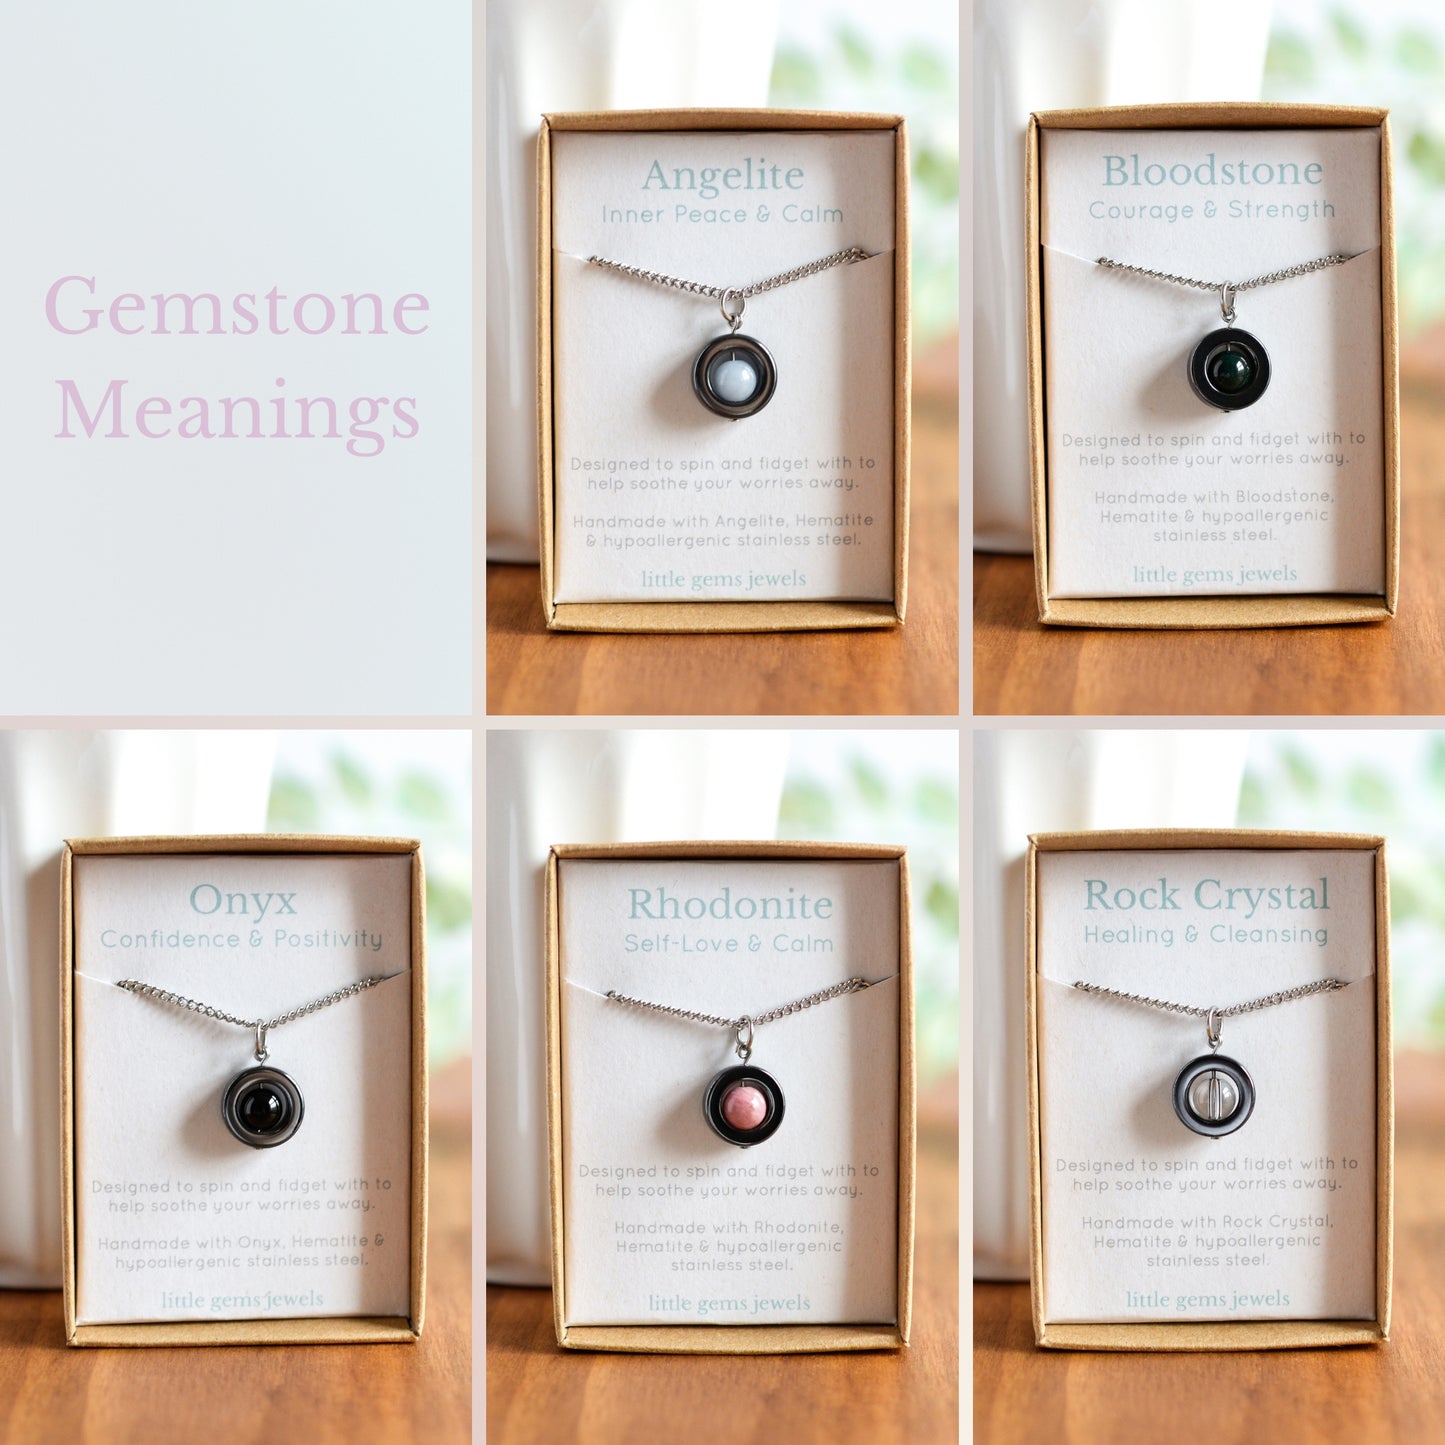 Gemstone meanings graphic showing gemstone spinner necklaces with their meaning cards in gift boxes.